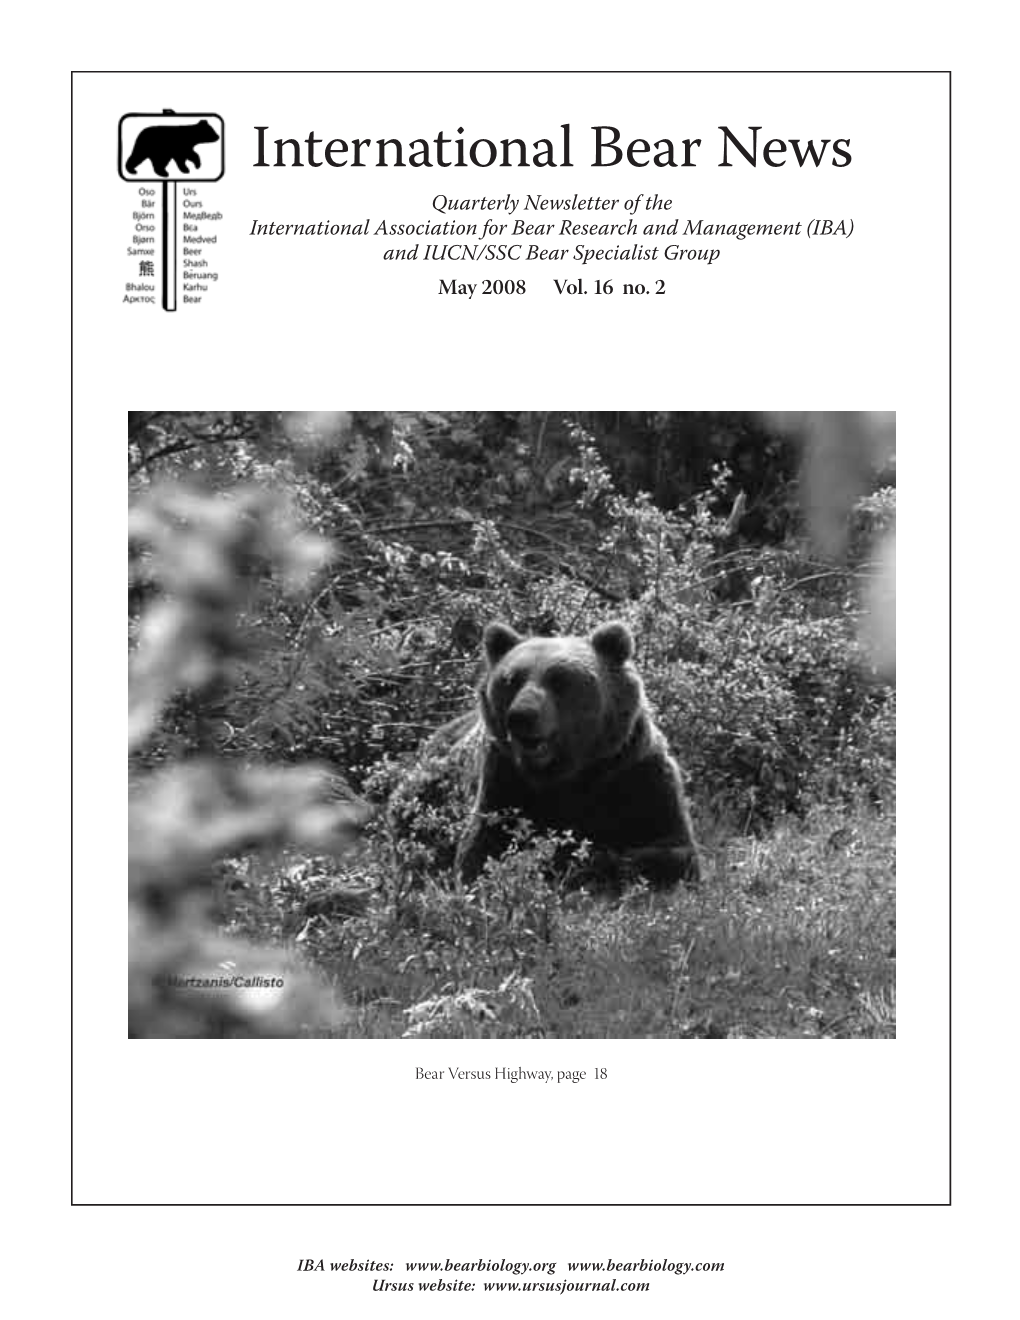 International Bear News Quarterly Newsletter of the International Association for Bear Research and Management (IBA) and IUCN/SSC Bear Specialist Group May 2008 Vol